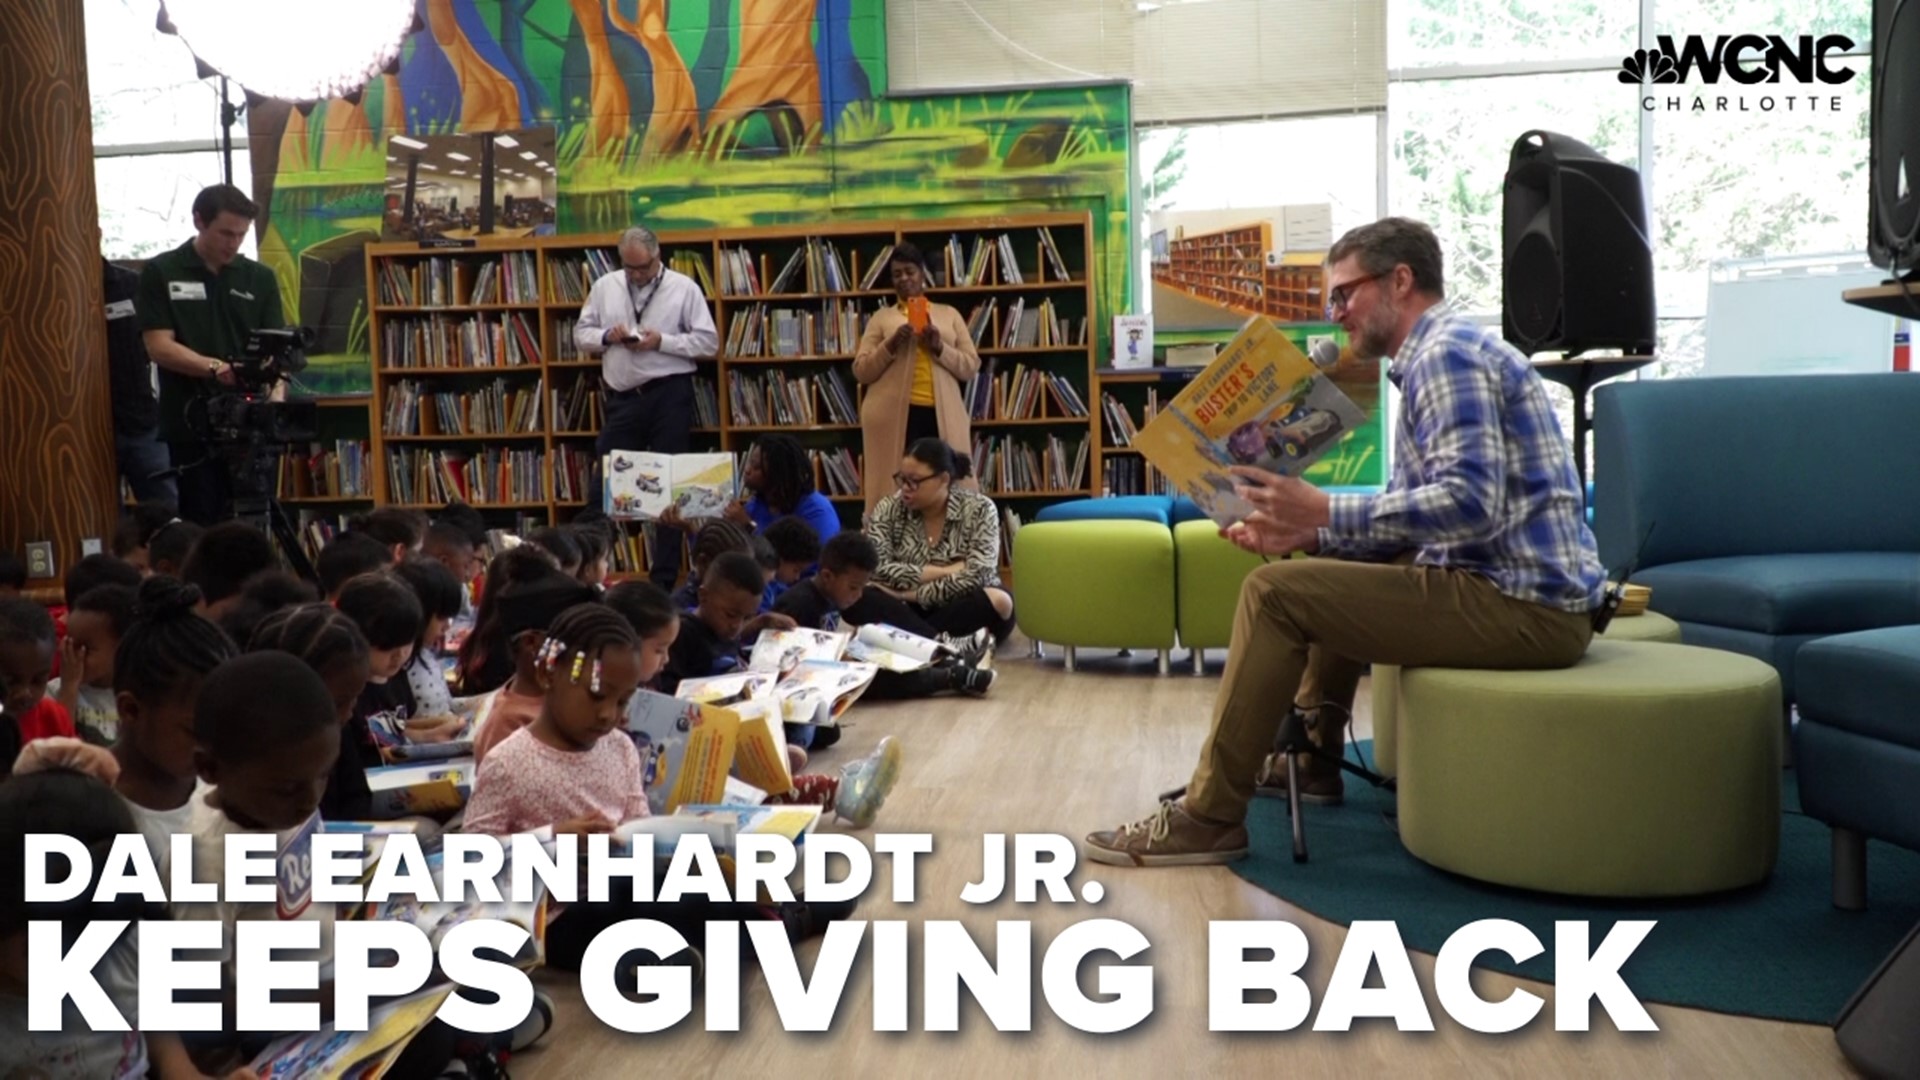 In 2020, his foundation gave a hand up to Allenbrook Elementary School. Three years later, he visited for a special children's book reading.